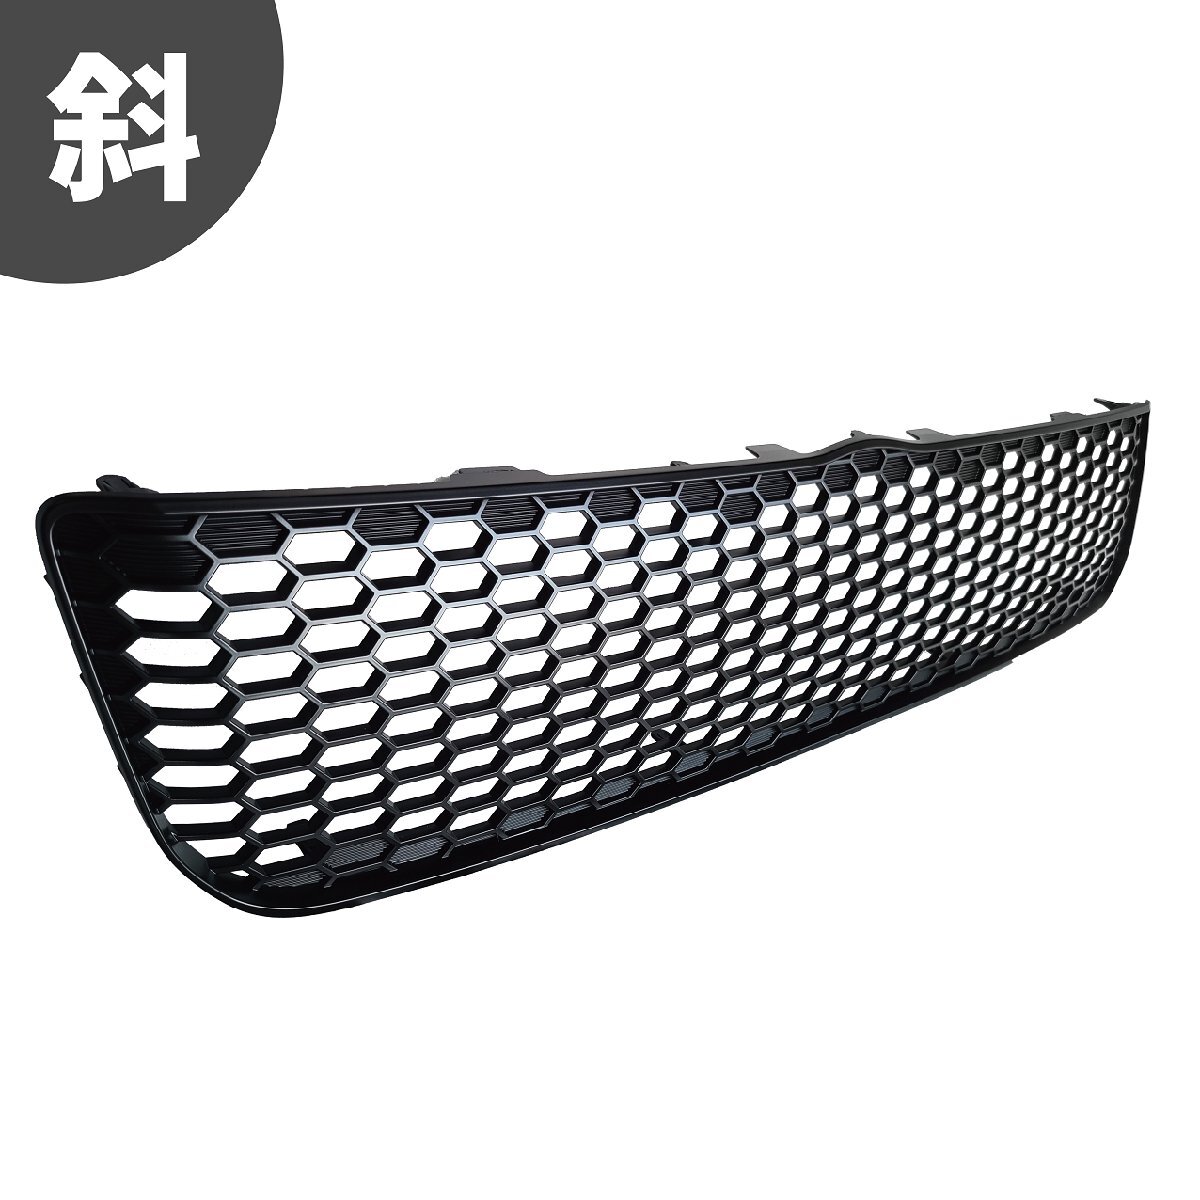  Toyota Succeed 50 series front grille Vintage mat black NCP50V NCP51V NCP52V NCP55V NCP58V NCP59V NLP51V NCP58G NCP59G